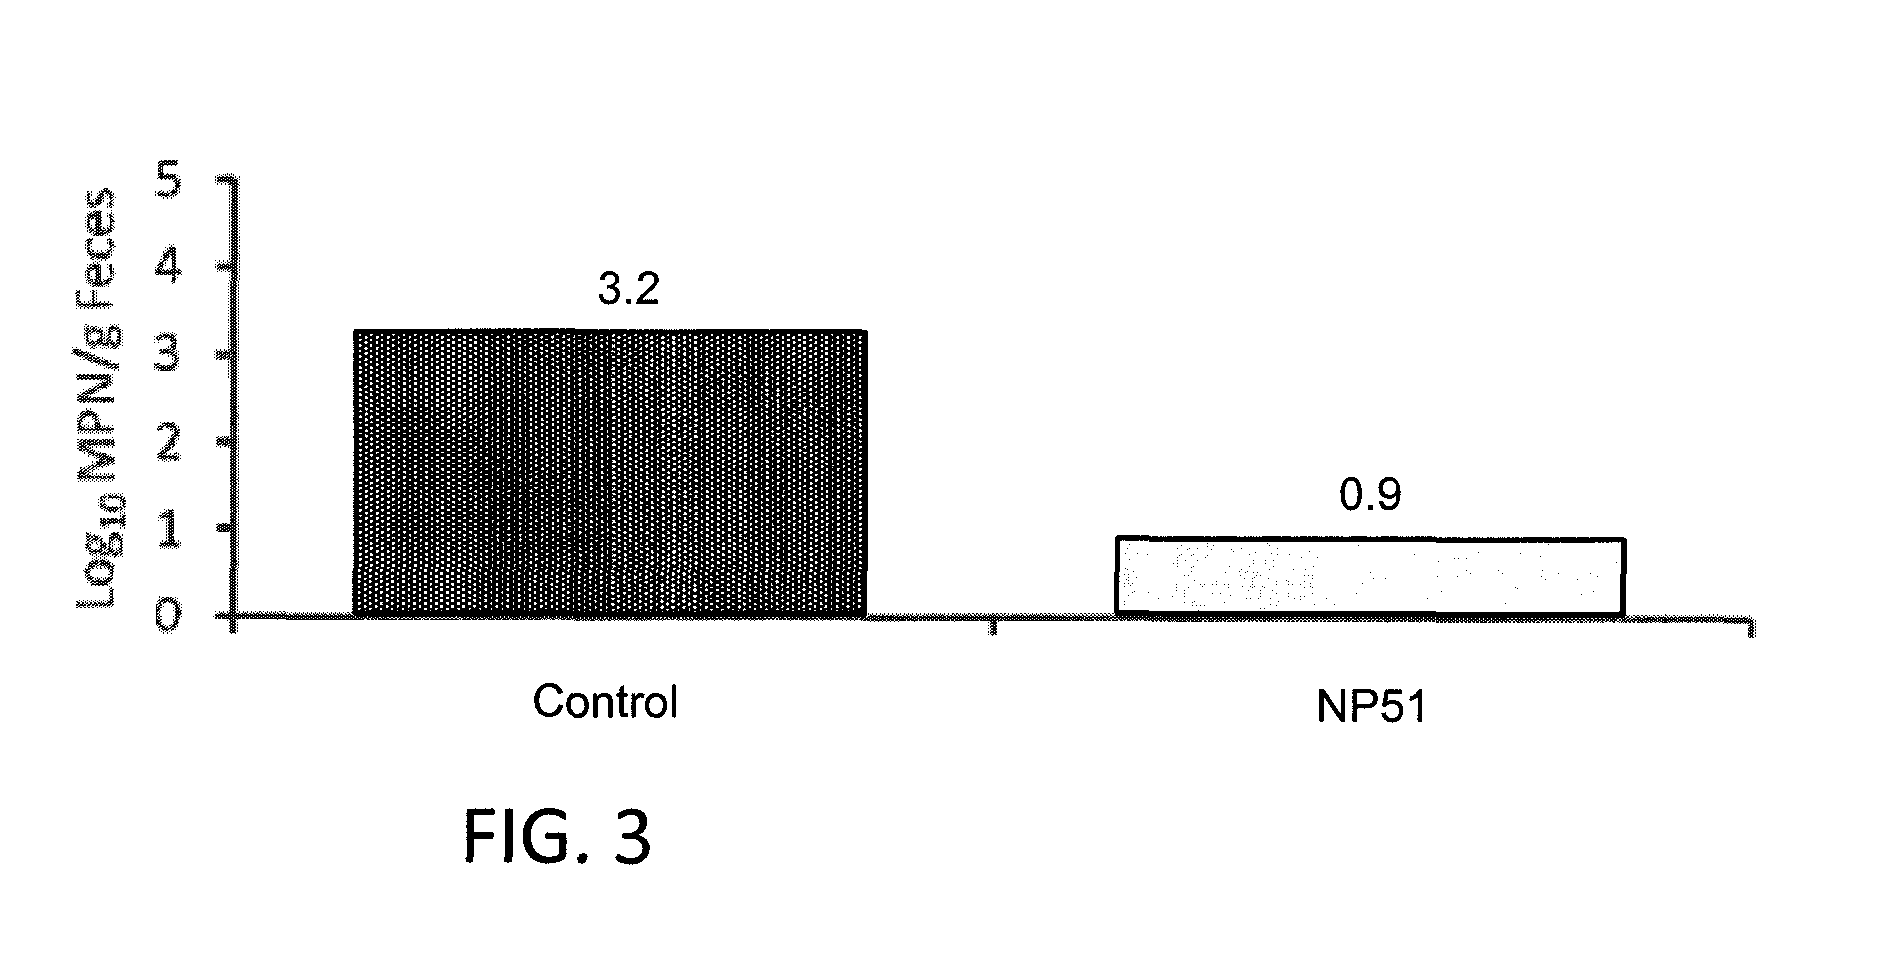 Low/high dose probiotic supplements and methods of their use